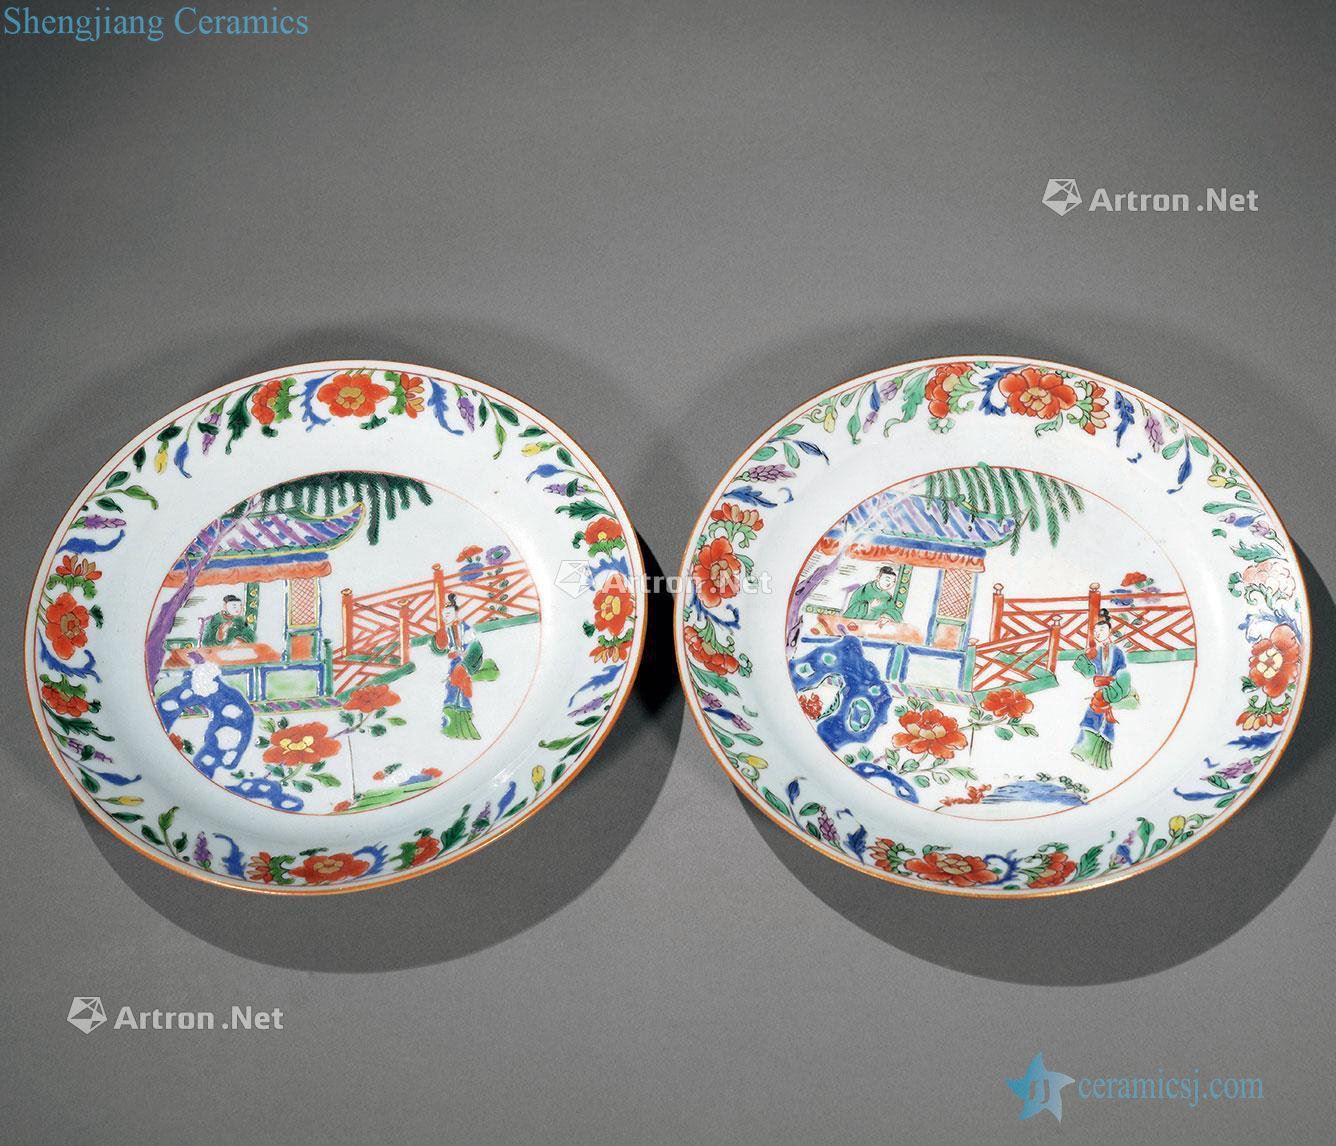 The qing emperor kangxi colorful west chamber plate (a)